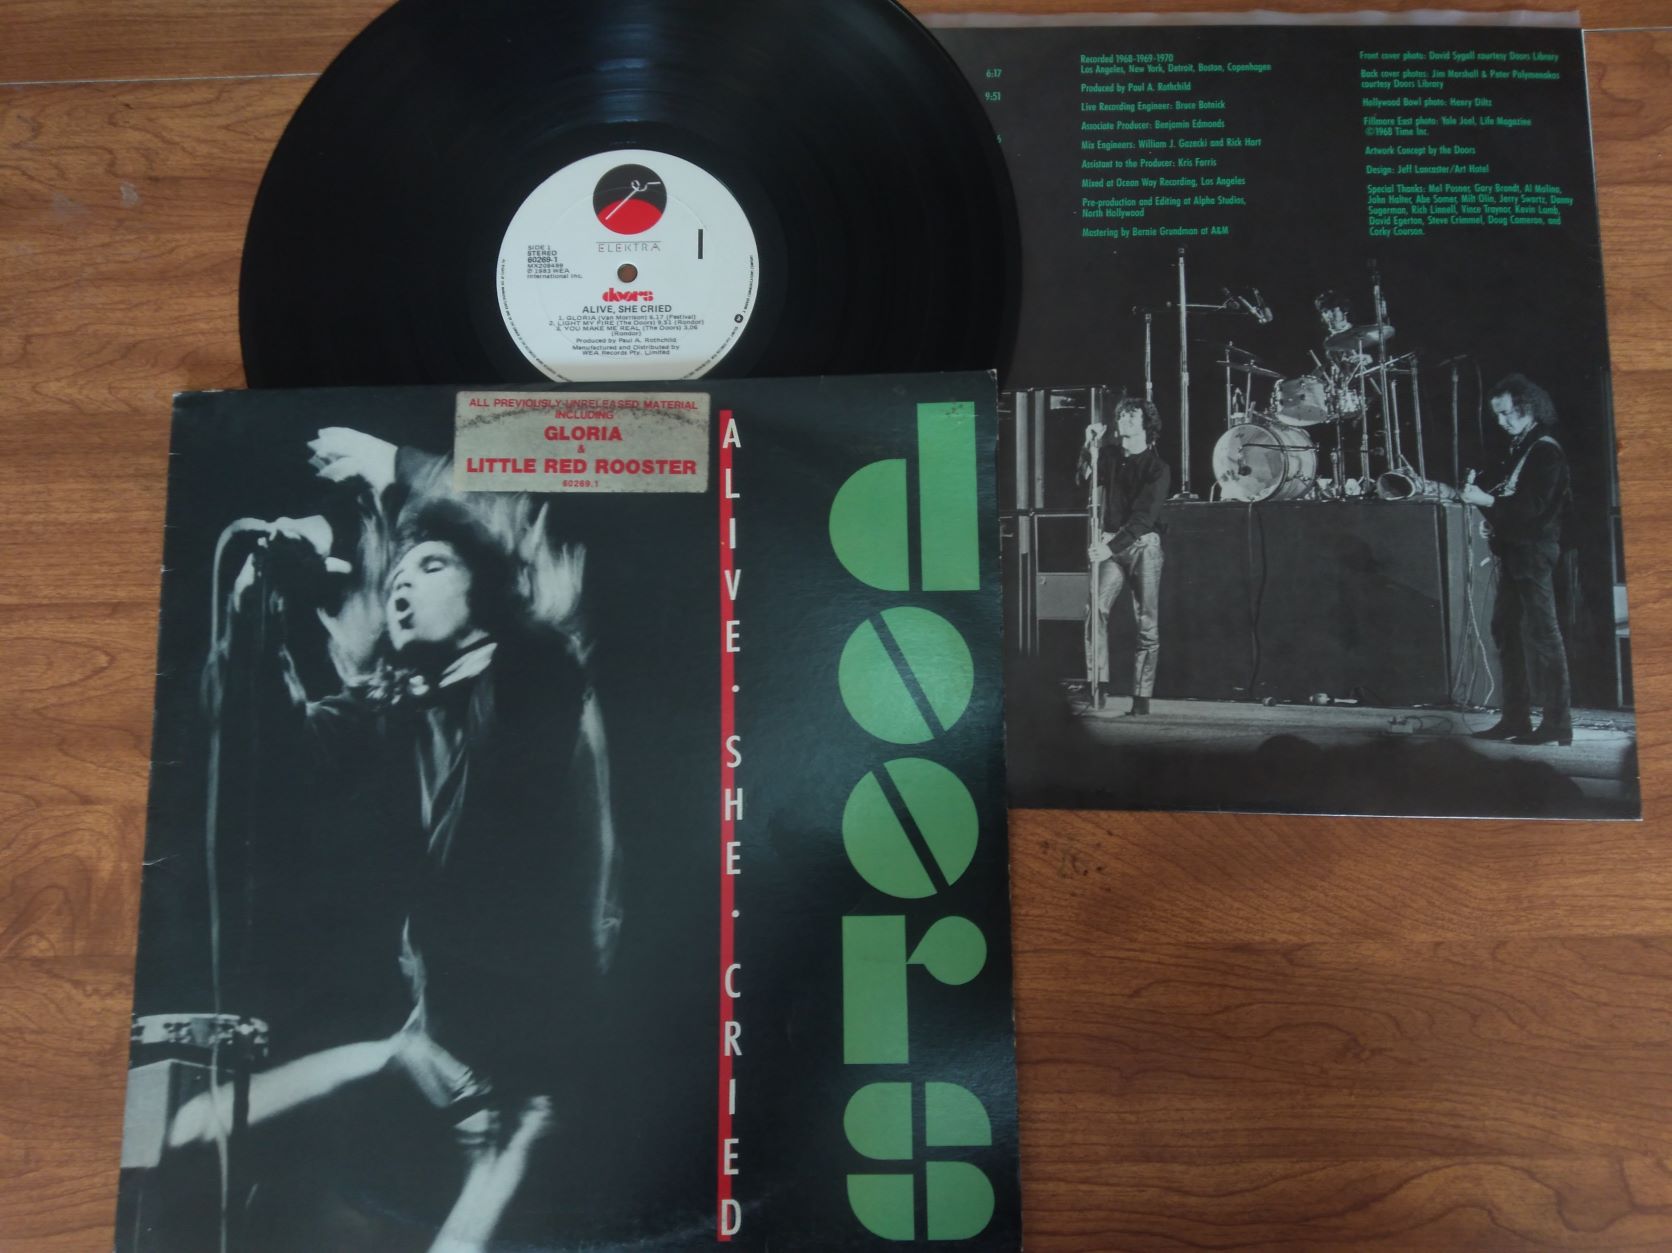 The Doors Alive She Cried - Record Day Australia